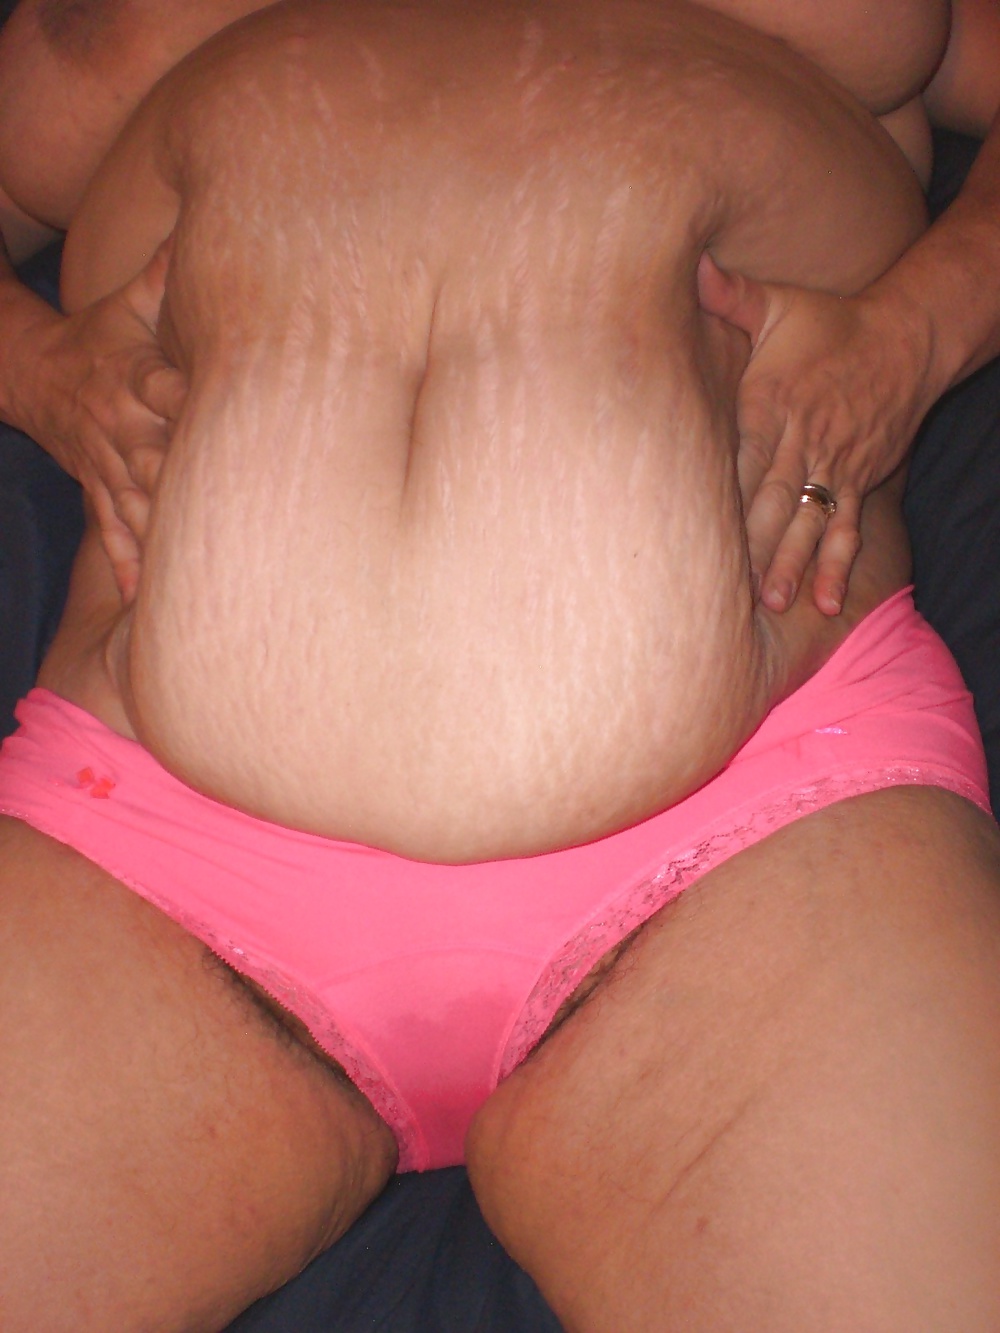 2014 new Saggy tits Flabby thigs Strech marked BBW slob wife #27840181